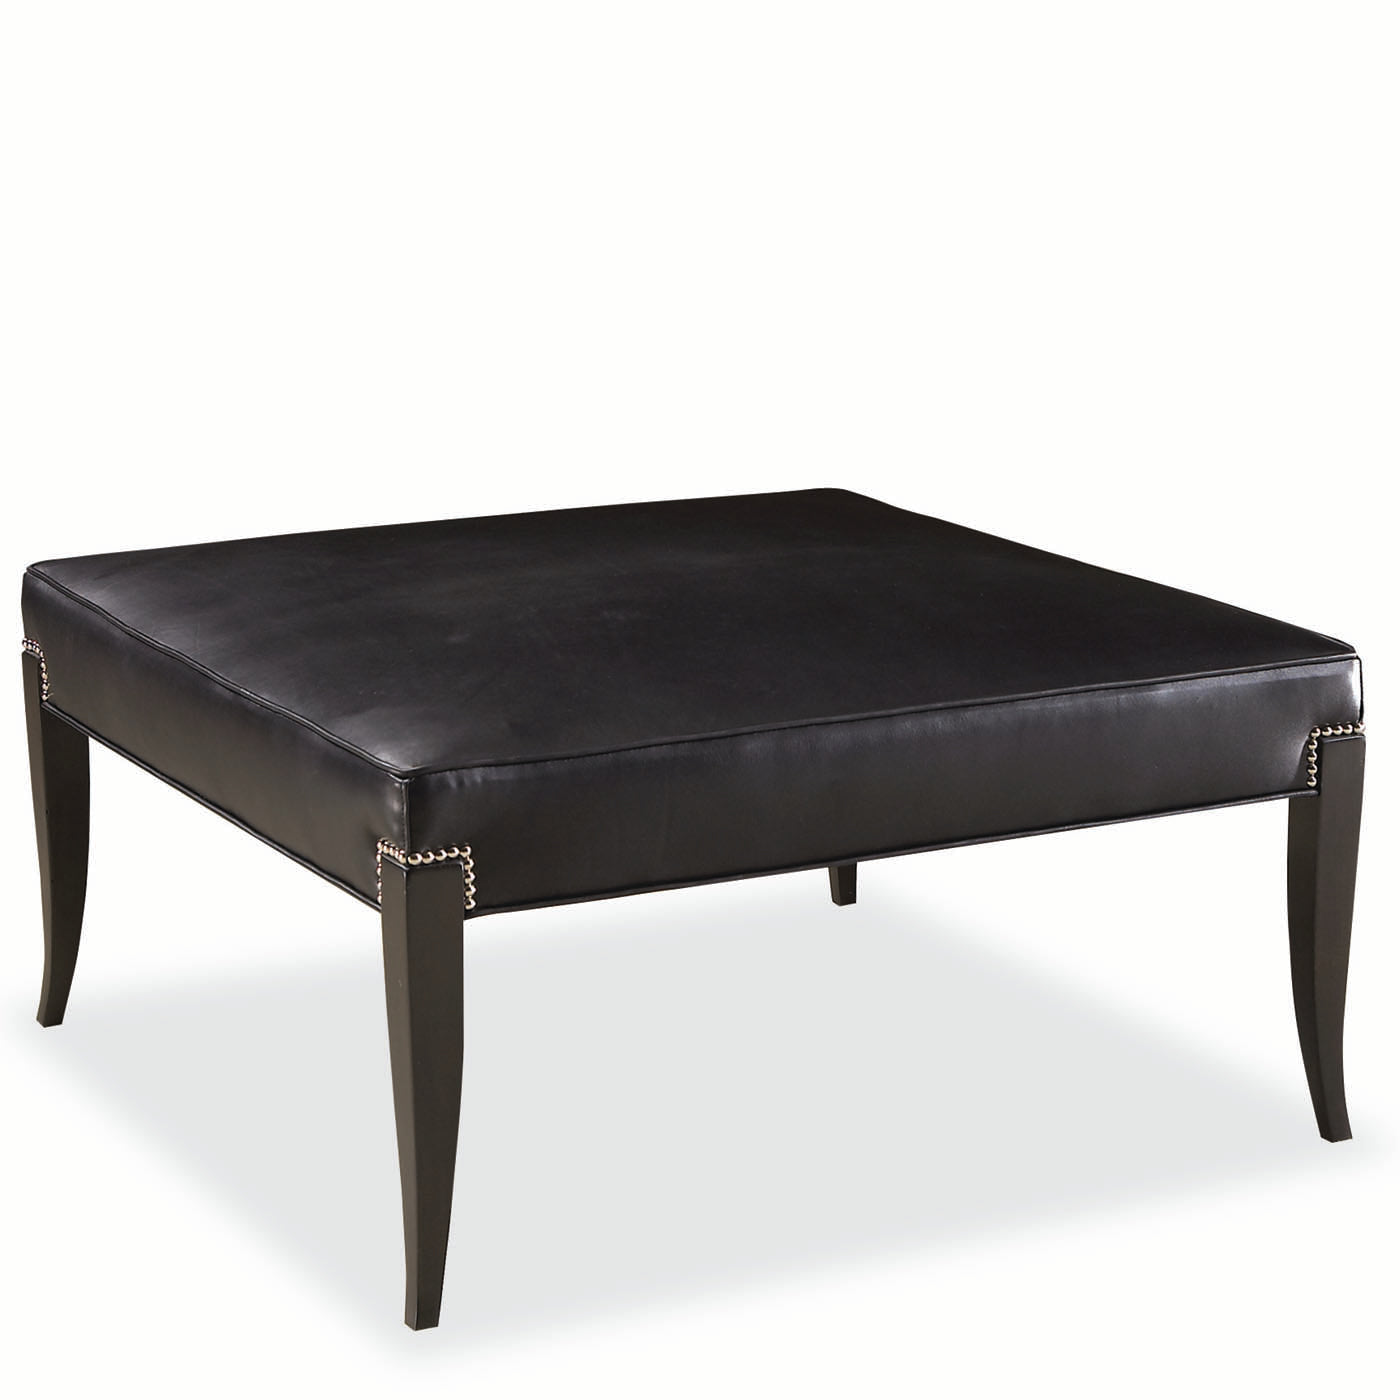 Raven Square Bench or cocktail Ottoman